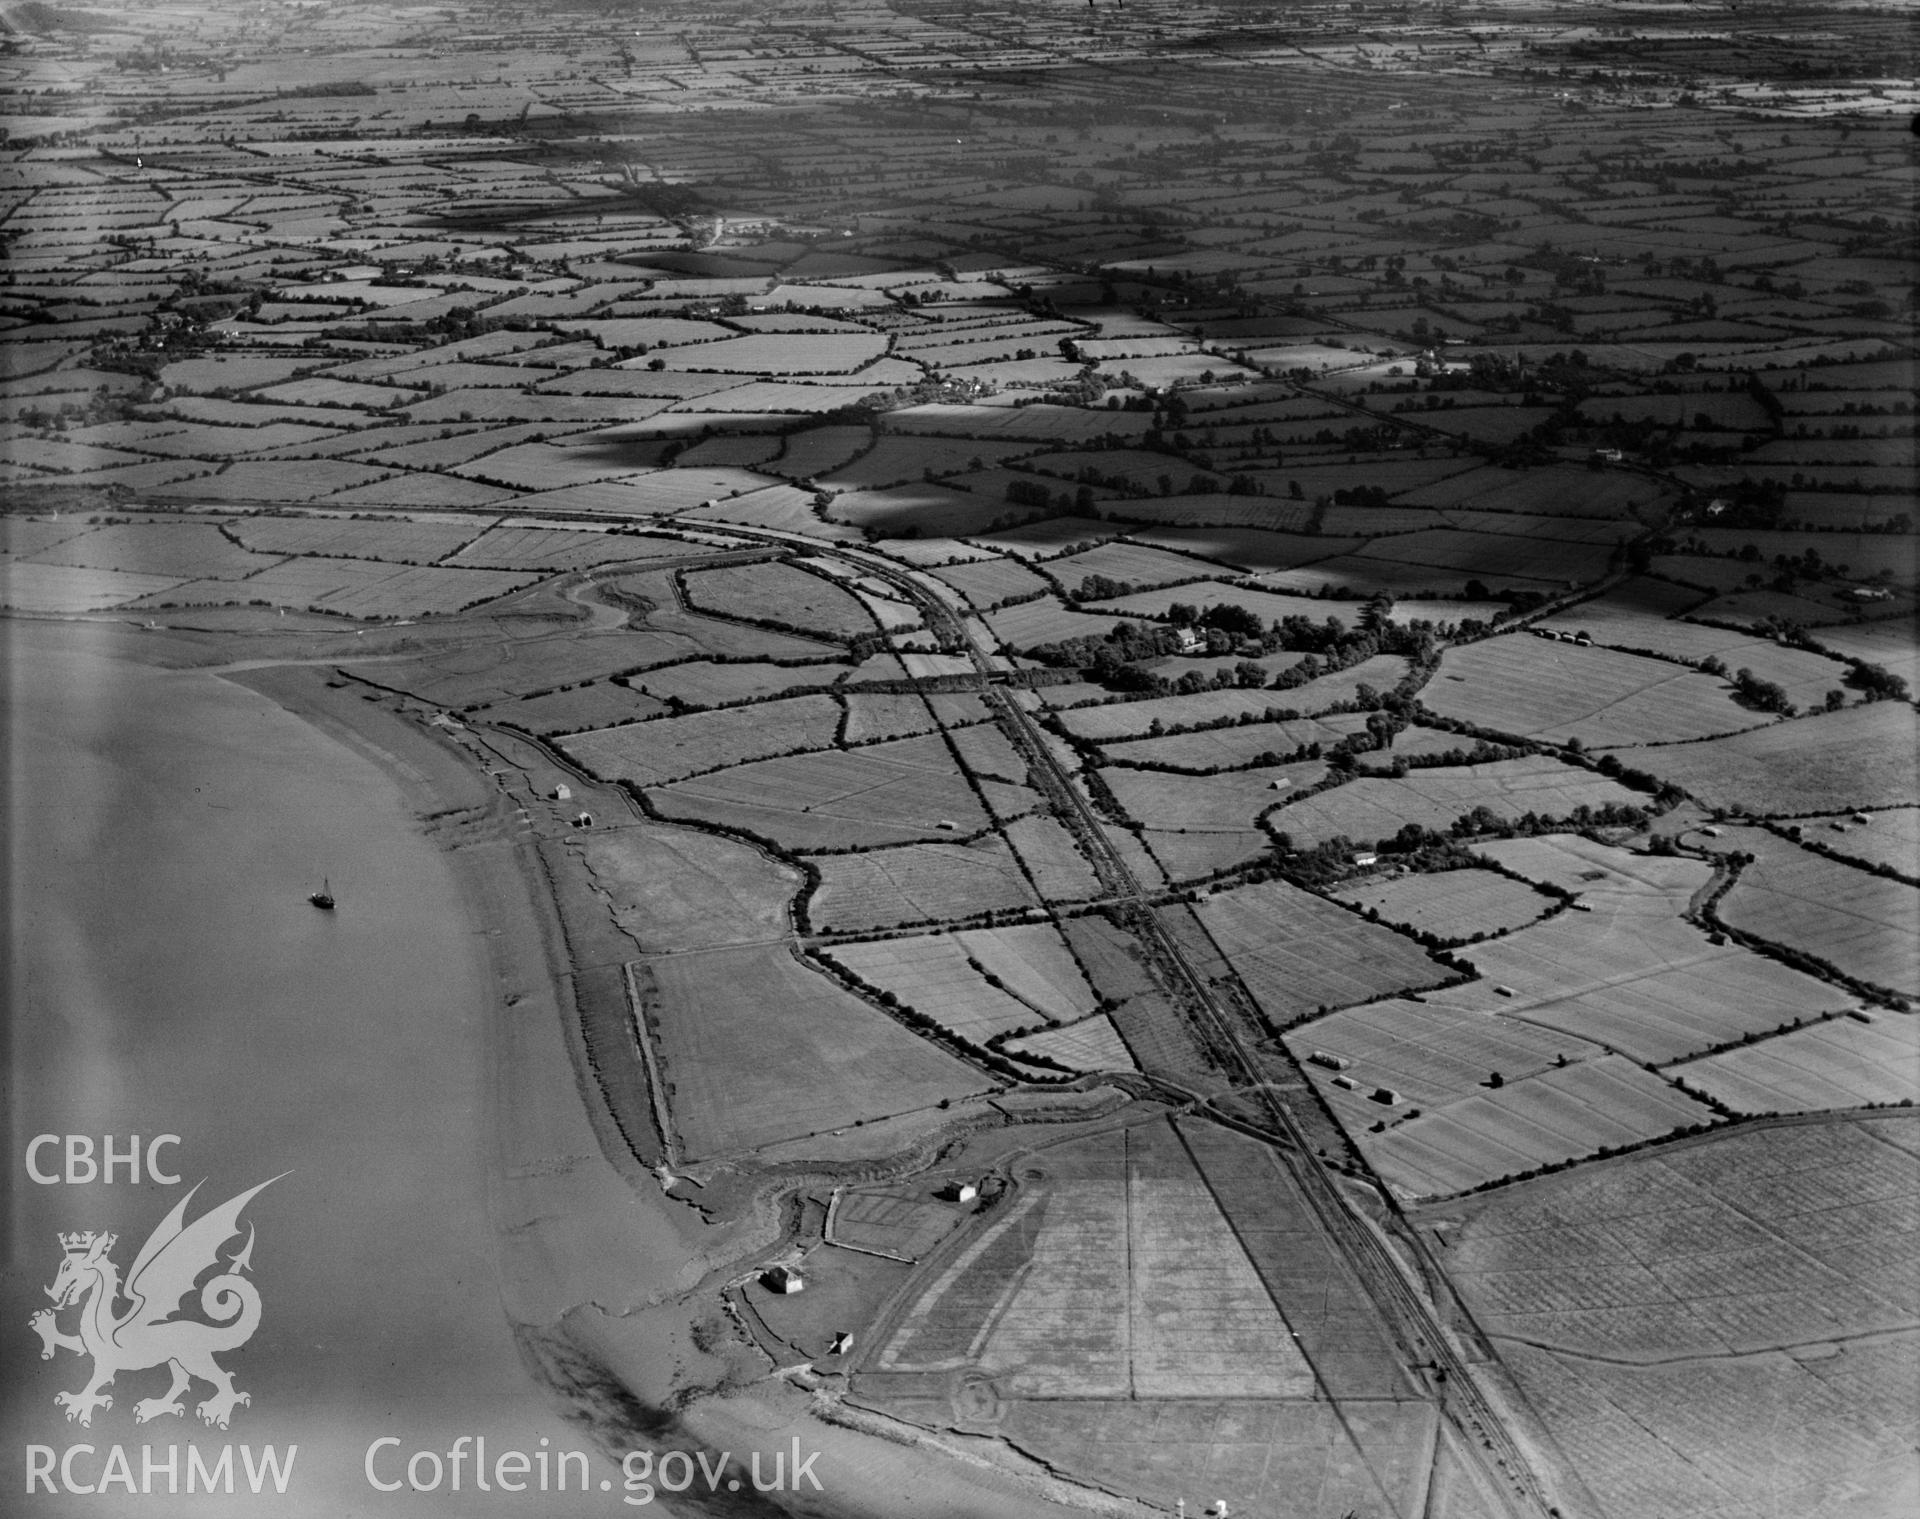 View showing area near Nash, Newport, oblique aerial view. 5?x4? black and white glass plate negative.